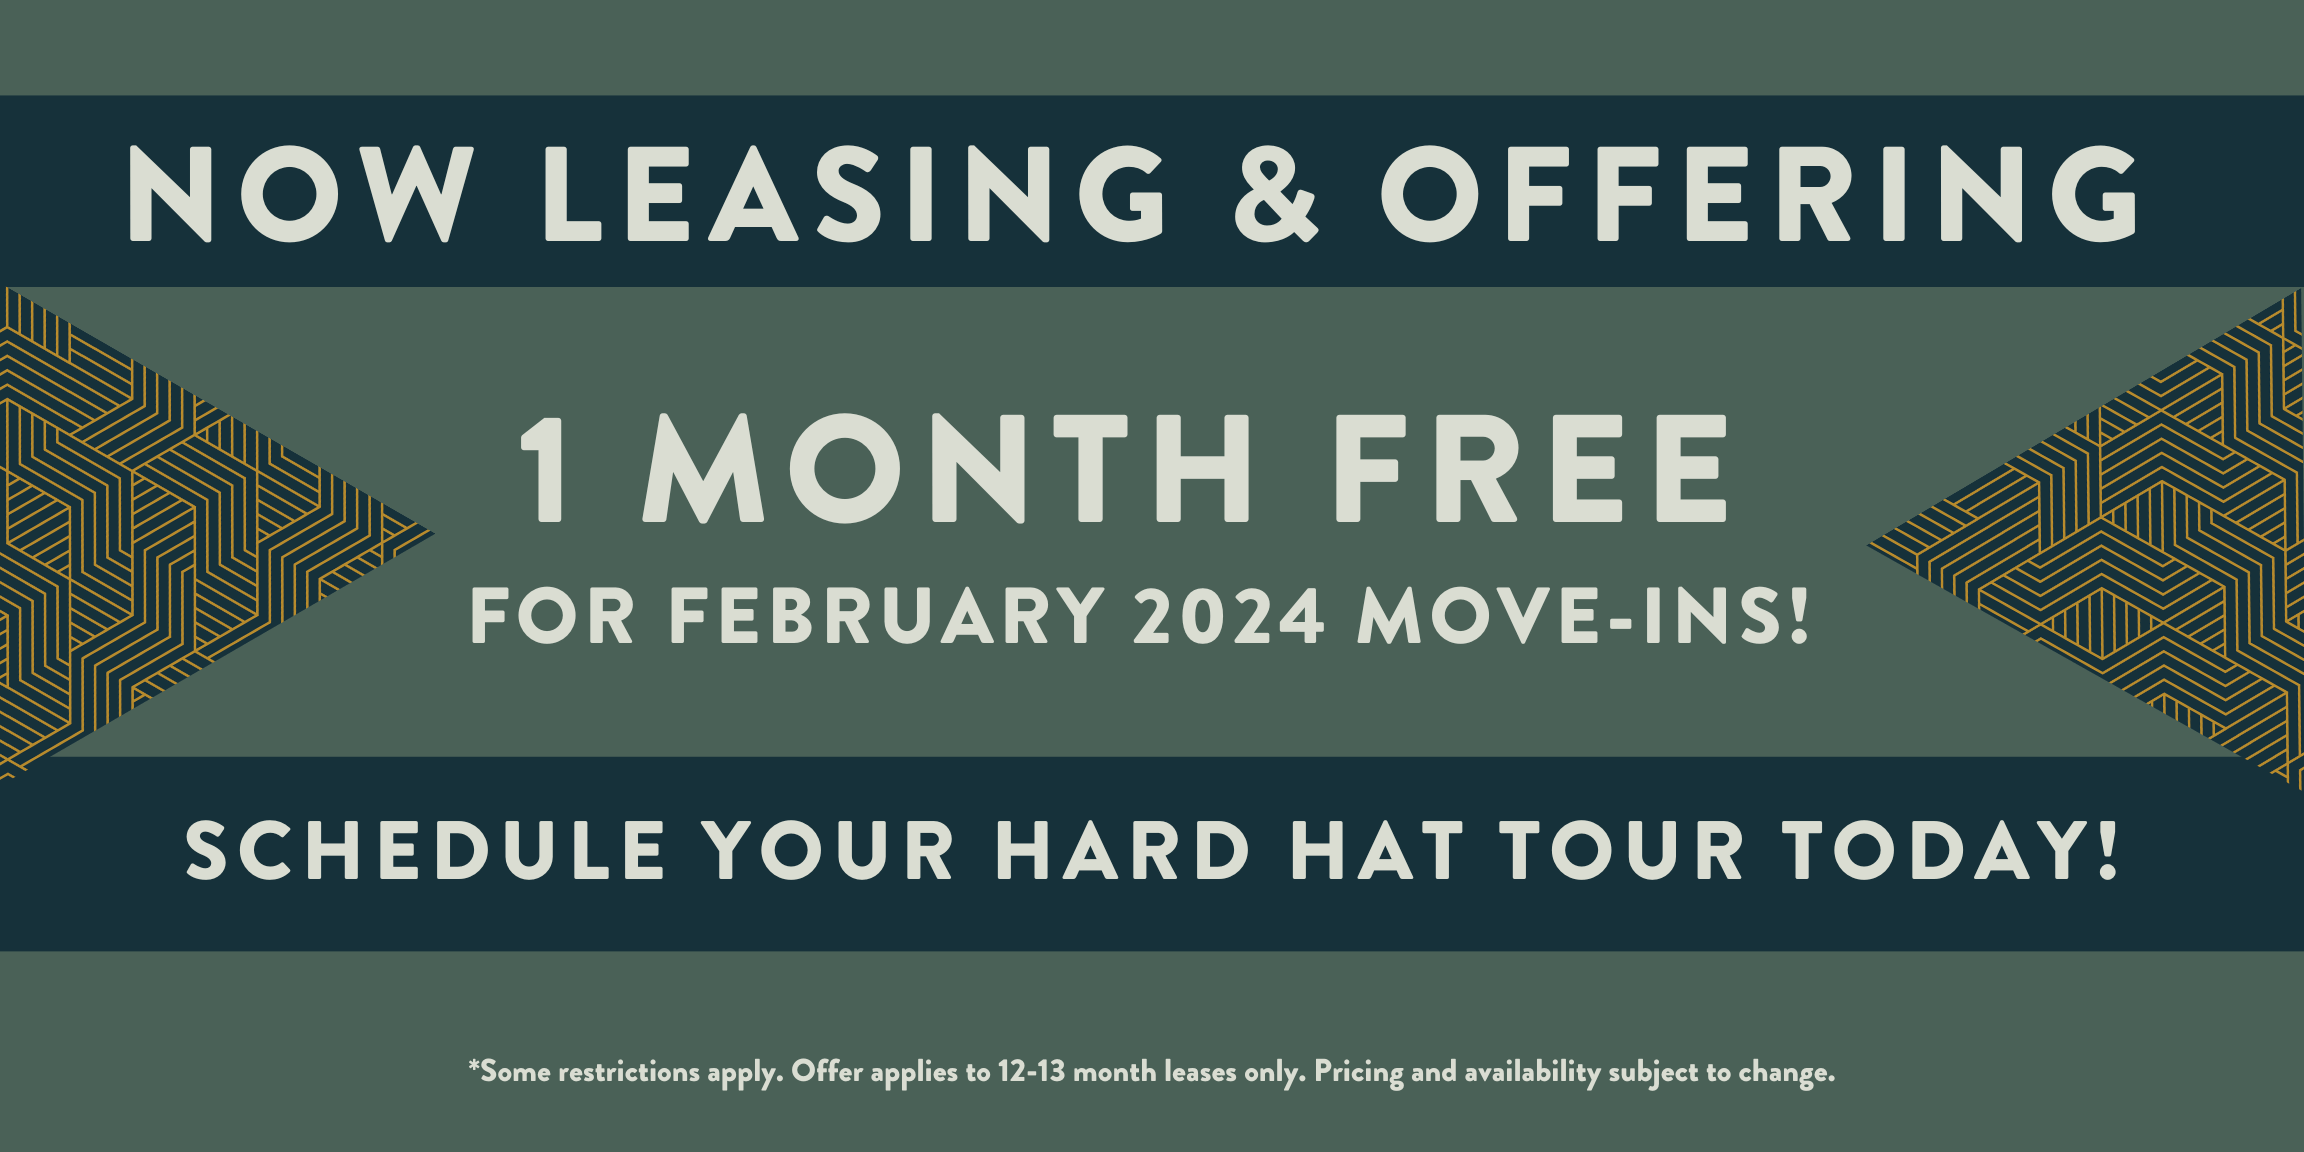 1 month free for February 2024 move-ins!